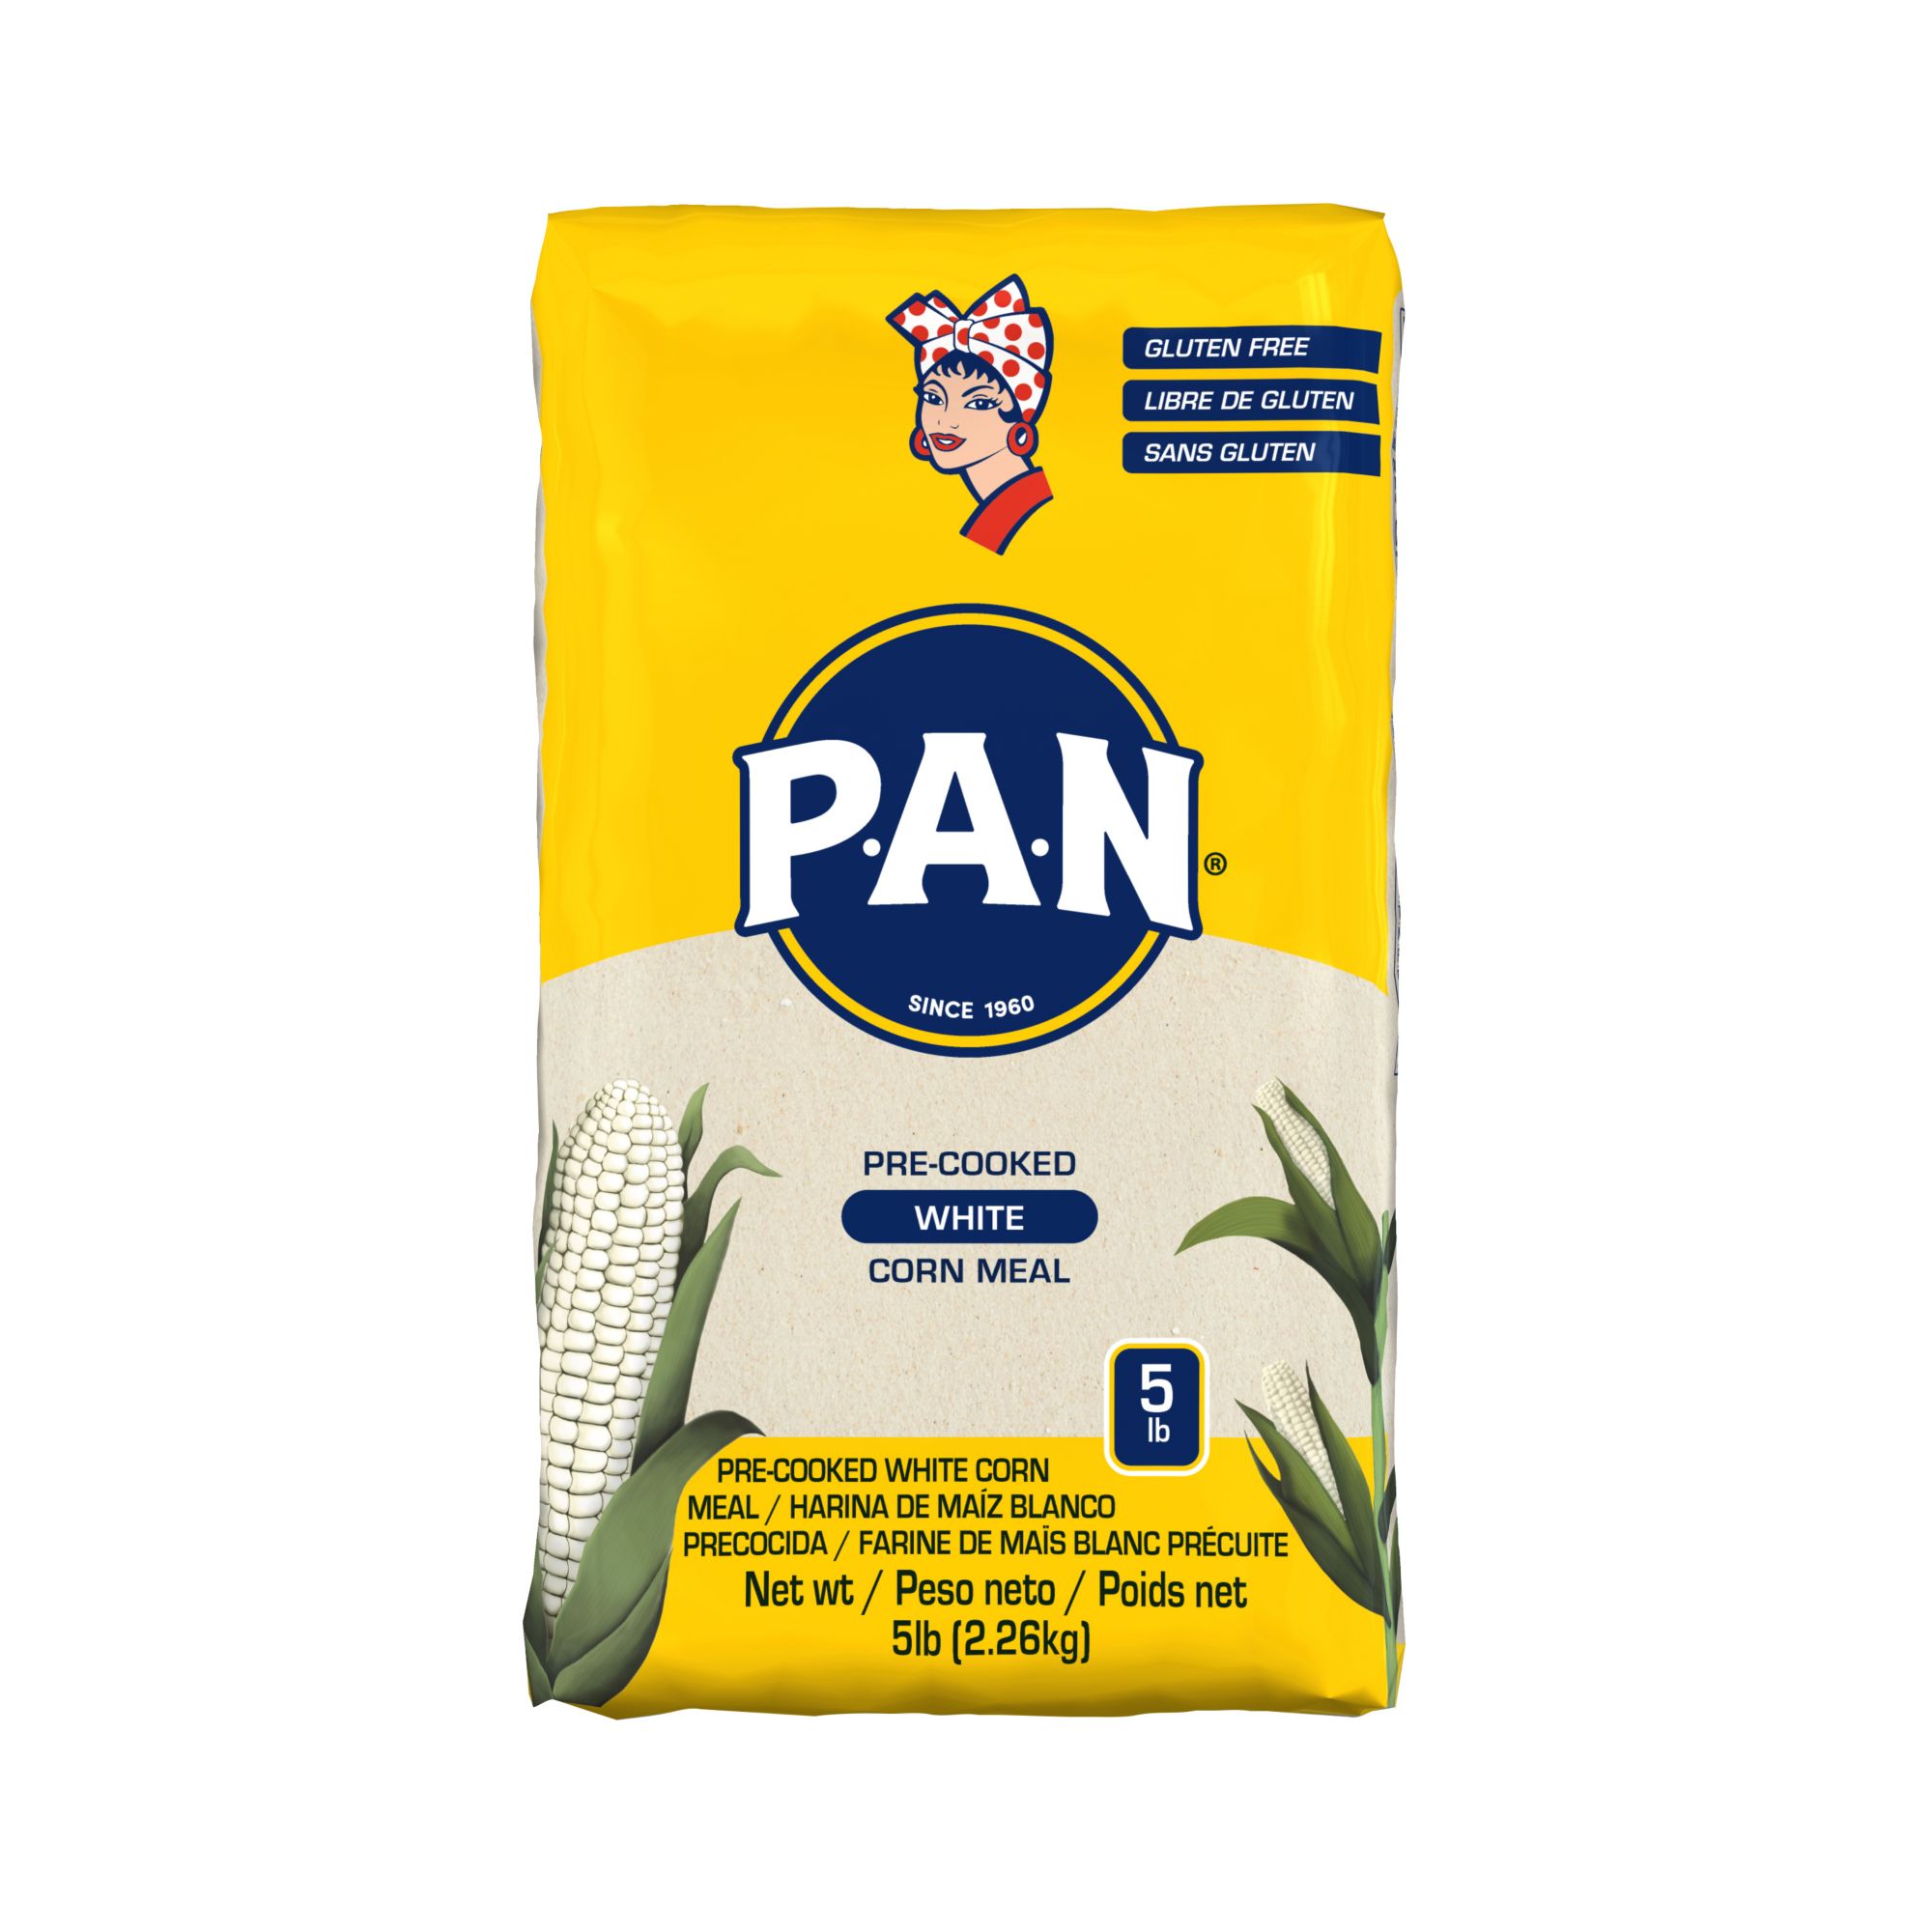 P.A.N. Pre-Cooked White Corn Meal, 5 lbs.